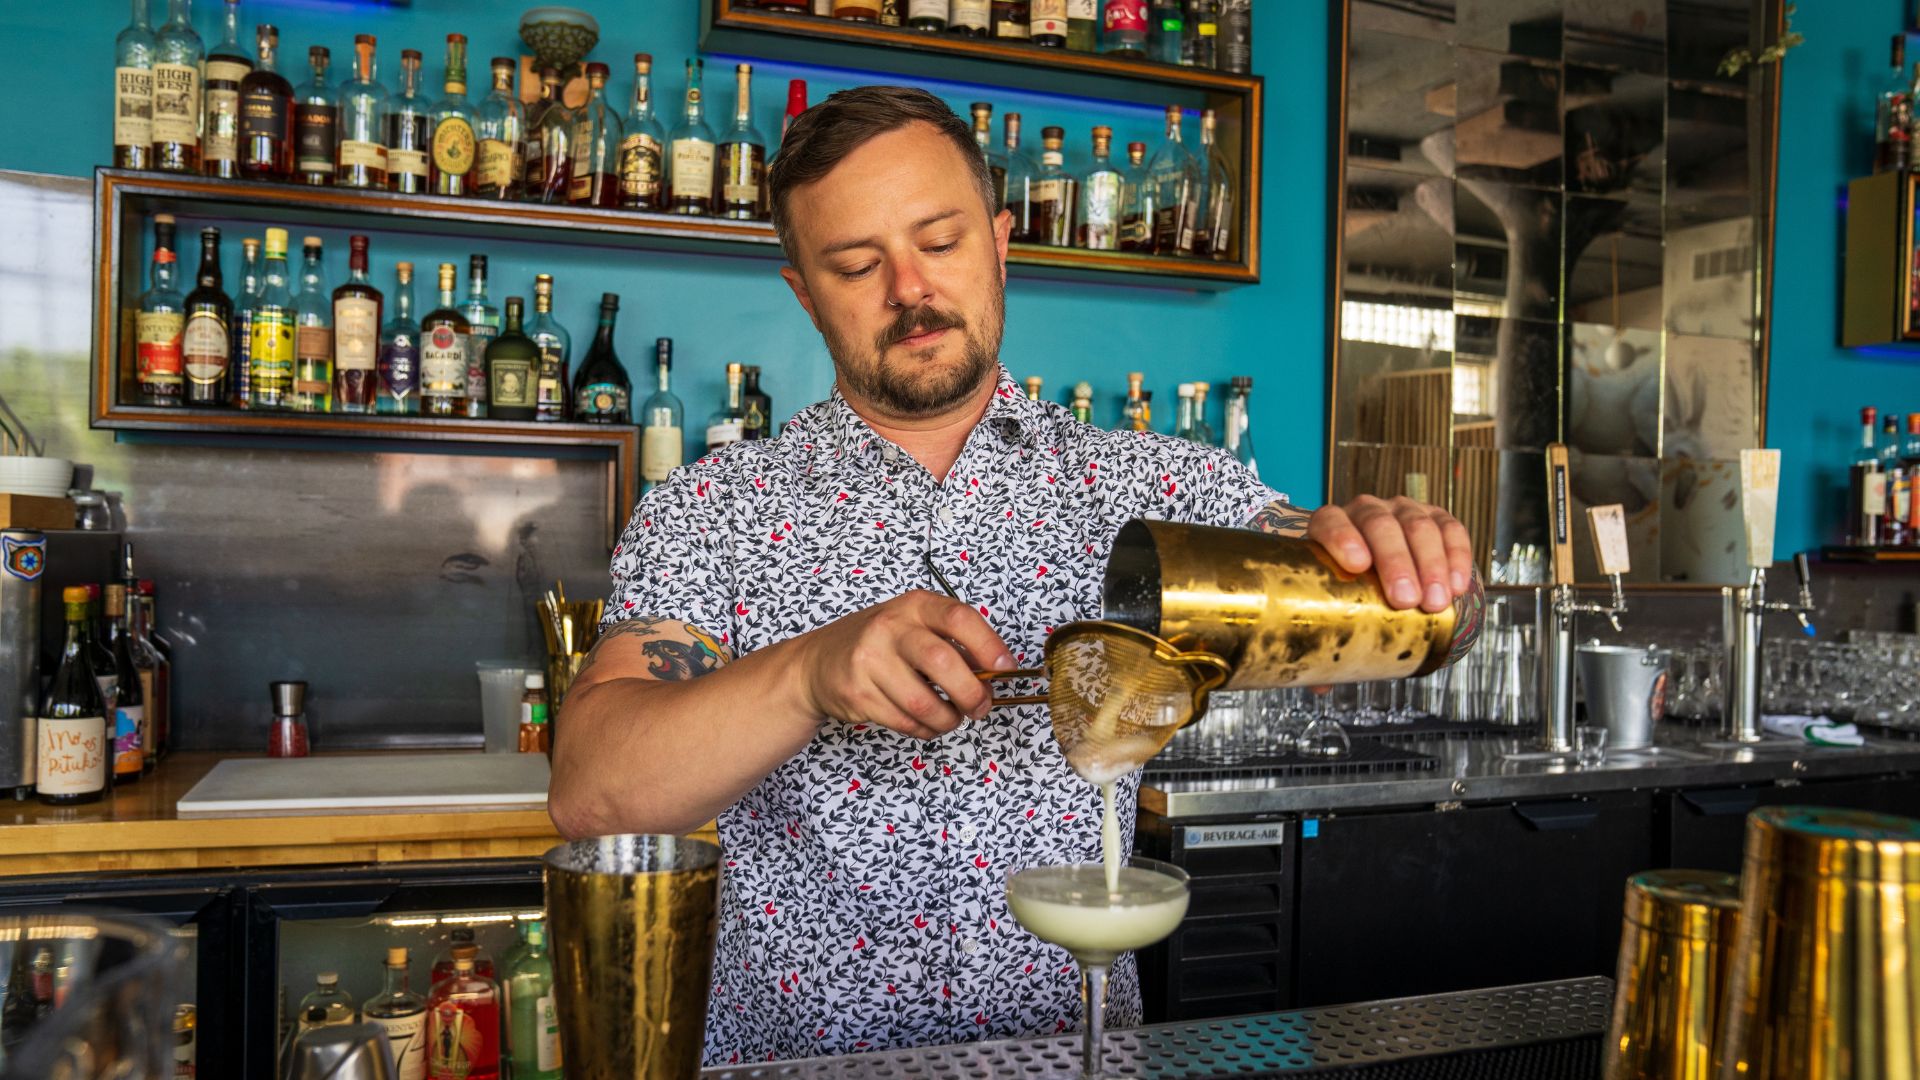 Beverage director Corey Moszer mixes drinks behind the bar of The Lucky Accomplice.